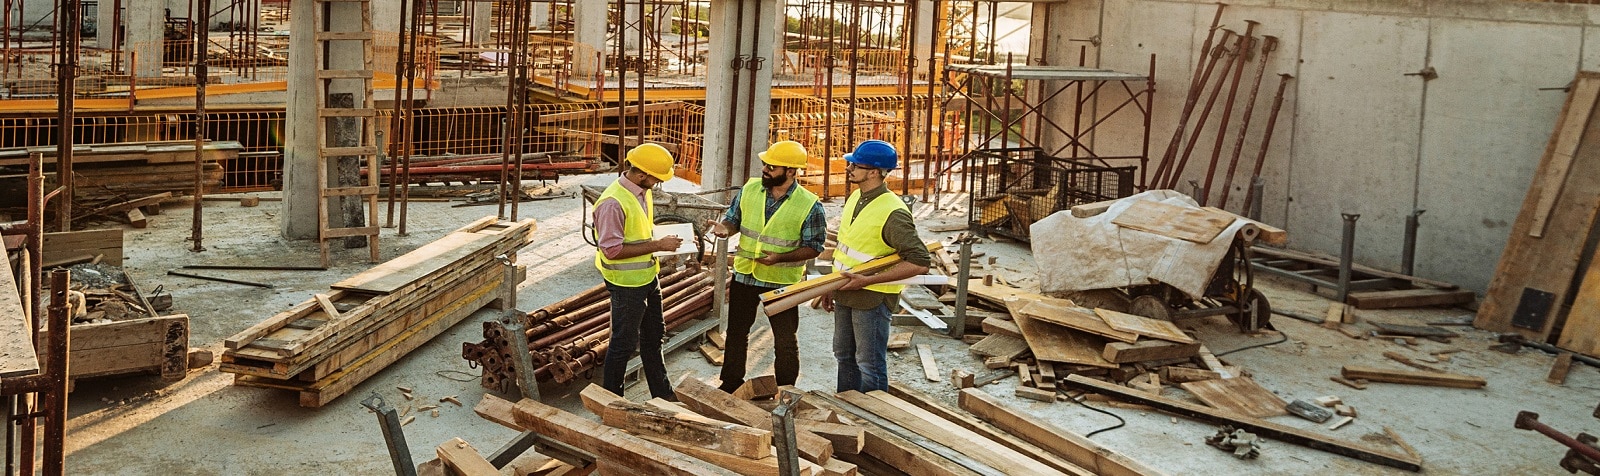 Construction site with three engineers